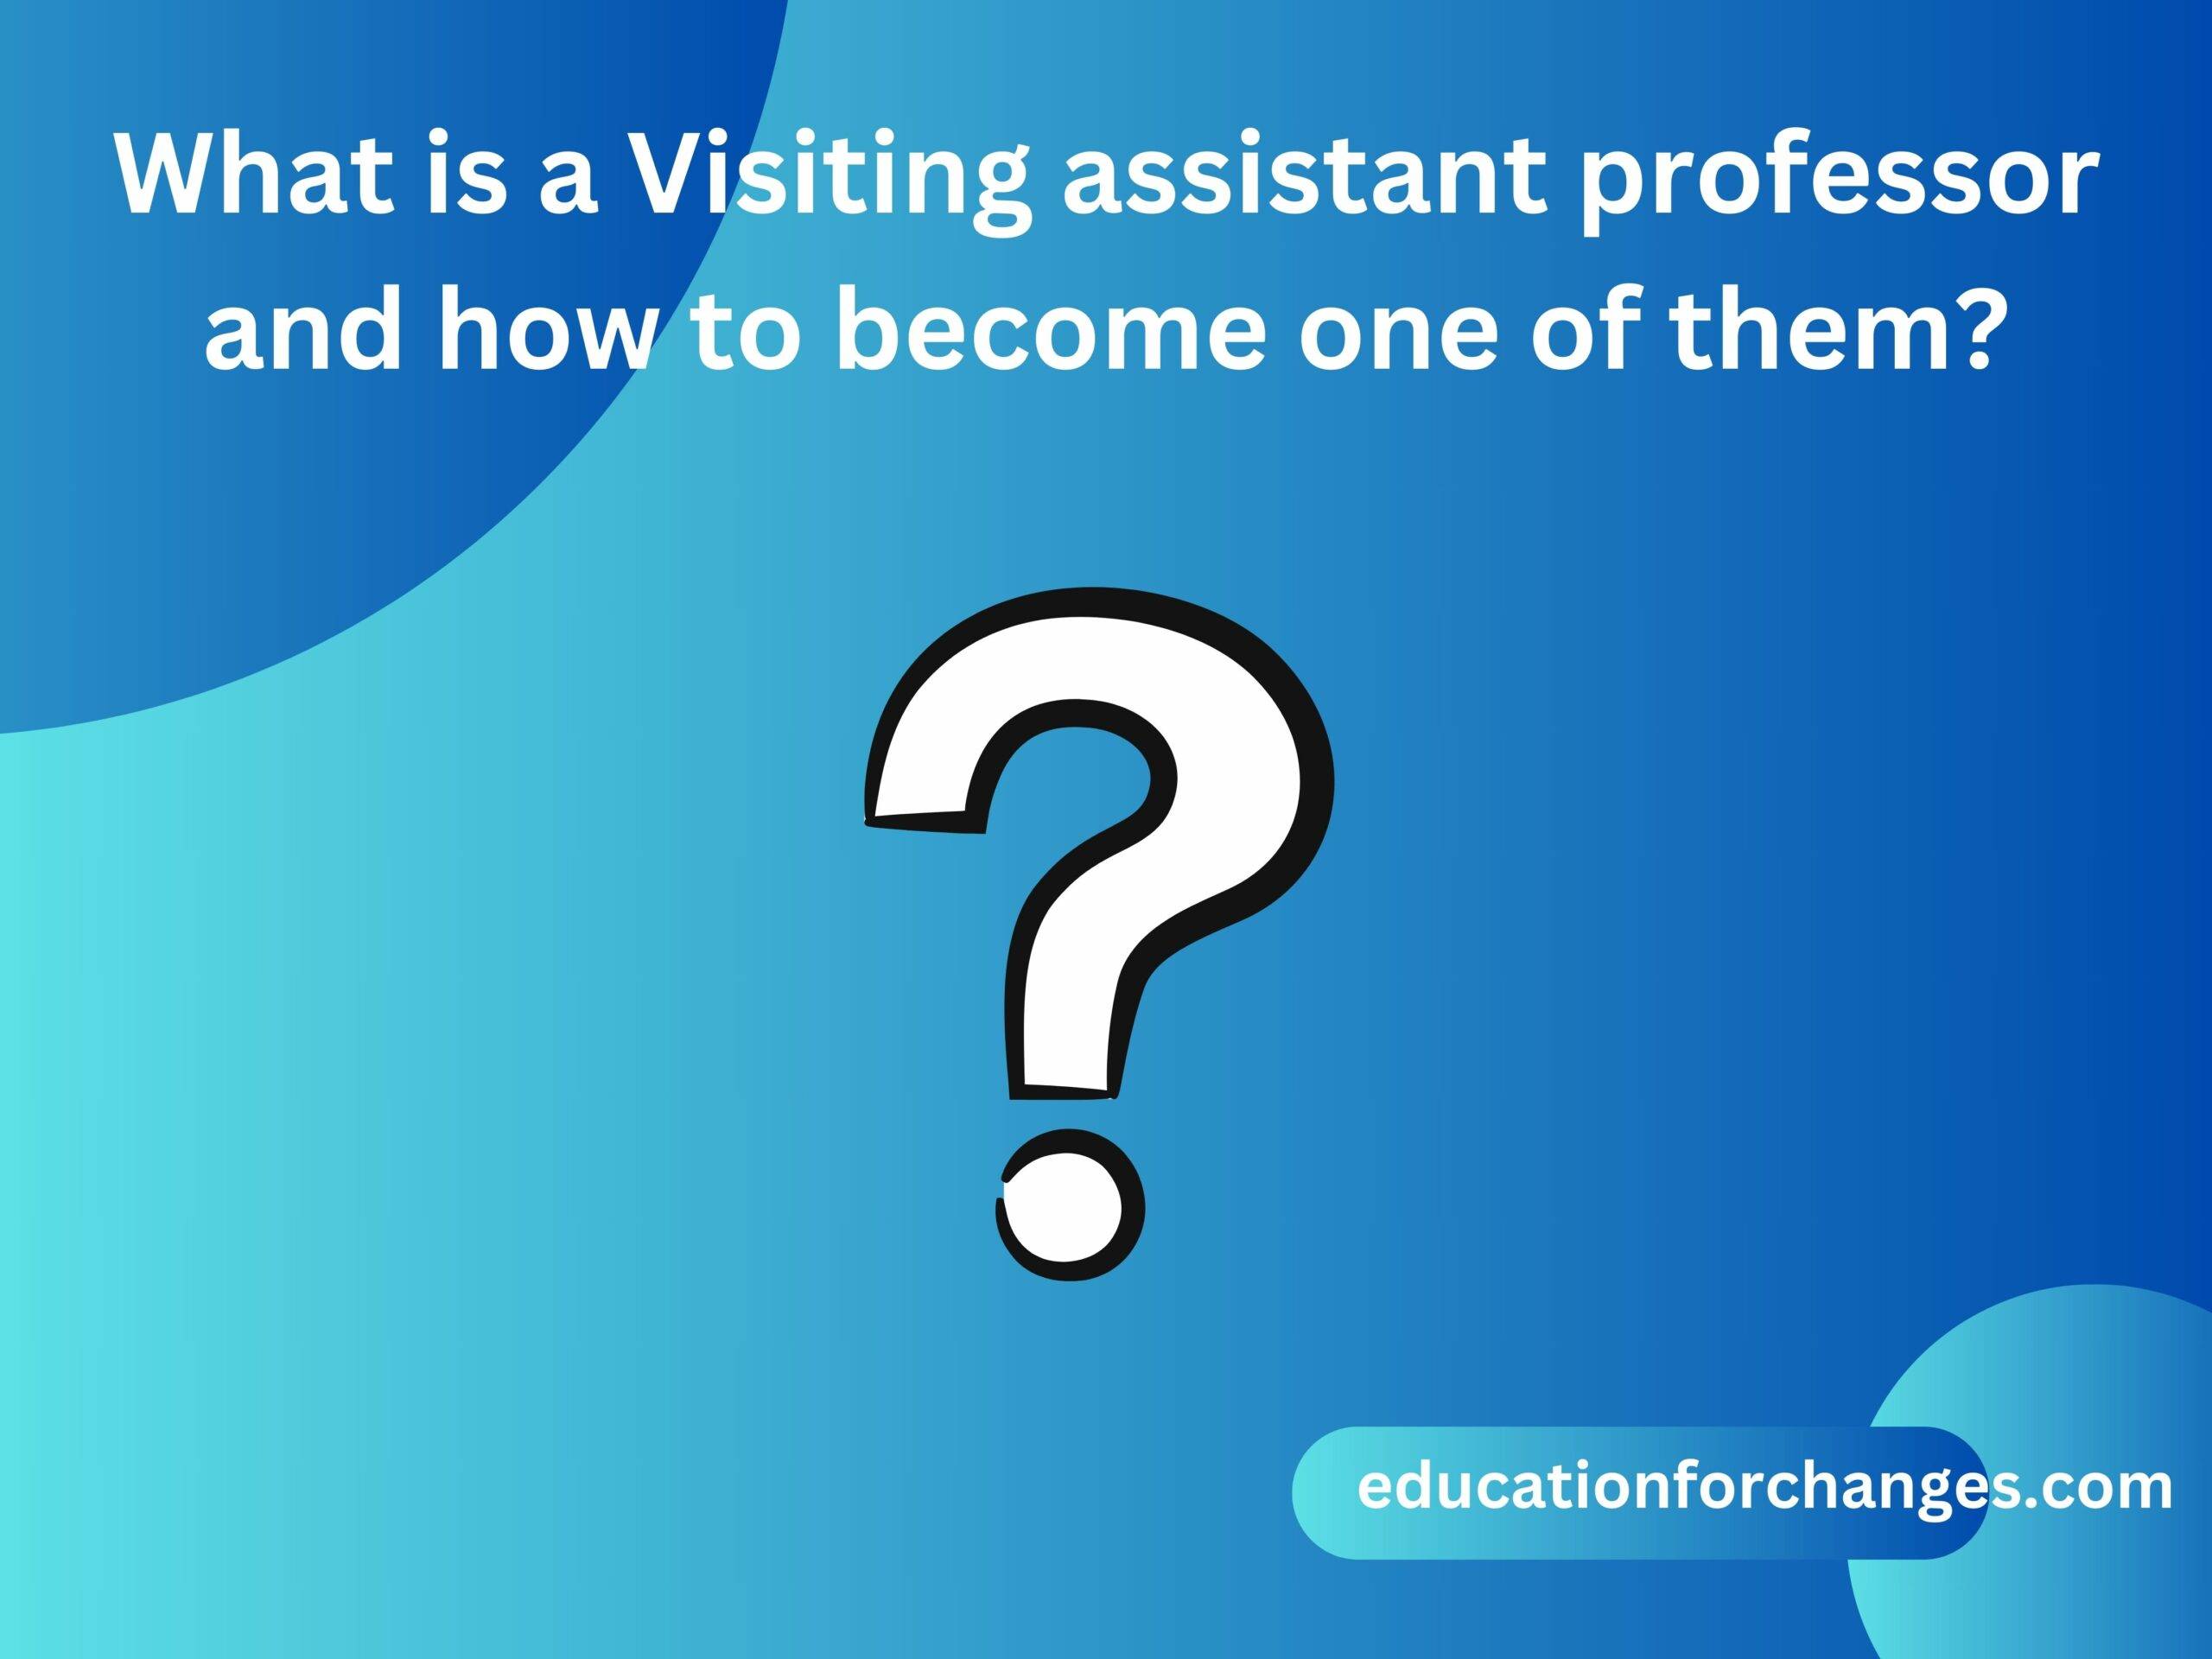 What is a Visiting assistant professor and how to become one of them